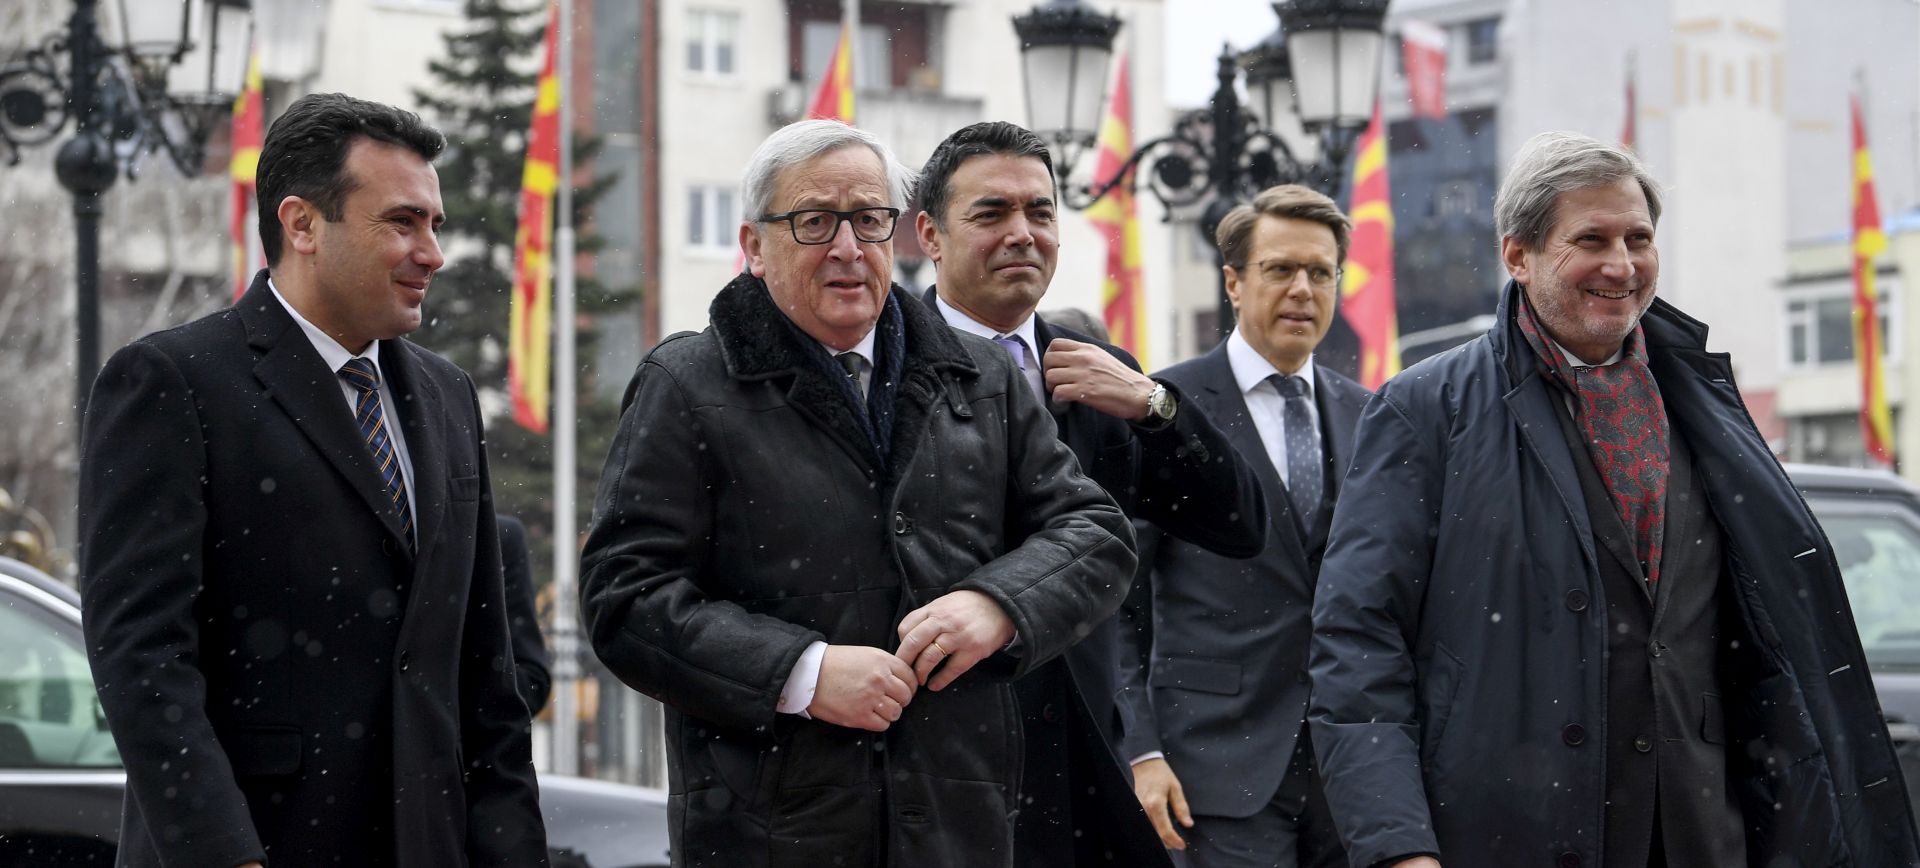 epa06564297 Macedonian Prime Minister Zoran Zaev (L) welcomes the President of European Commission Jean-Claude Juncker (C) and European Commissioner for European Neighbourhood Policy and Enlargement Negotiations Johannes Hahn (R) in front of the Government building in Skopje, The Former Yugoslav Republic of Macedonia, 25 February 2018. Juncker arrives on a one-day work visit to FYR of Macedonia during his Balkan tour.  EPA/GEORGI LICOVSKI